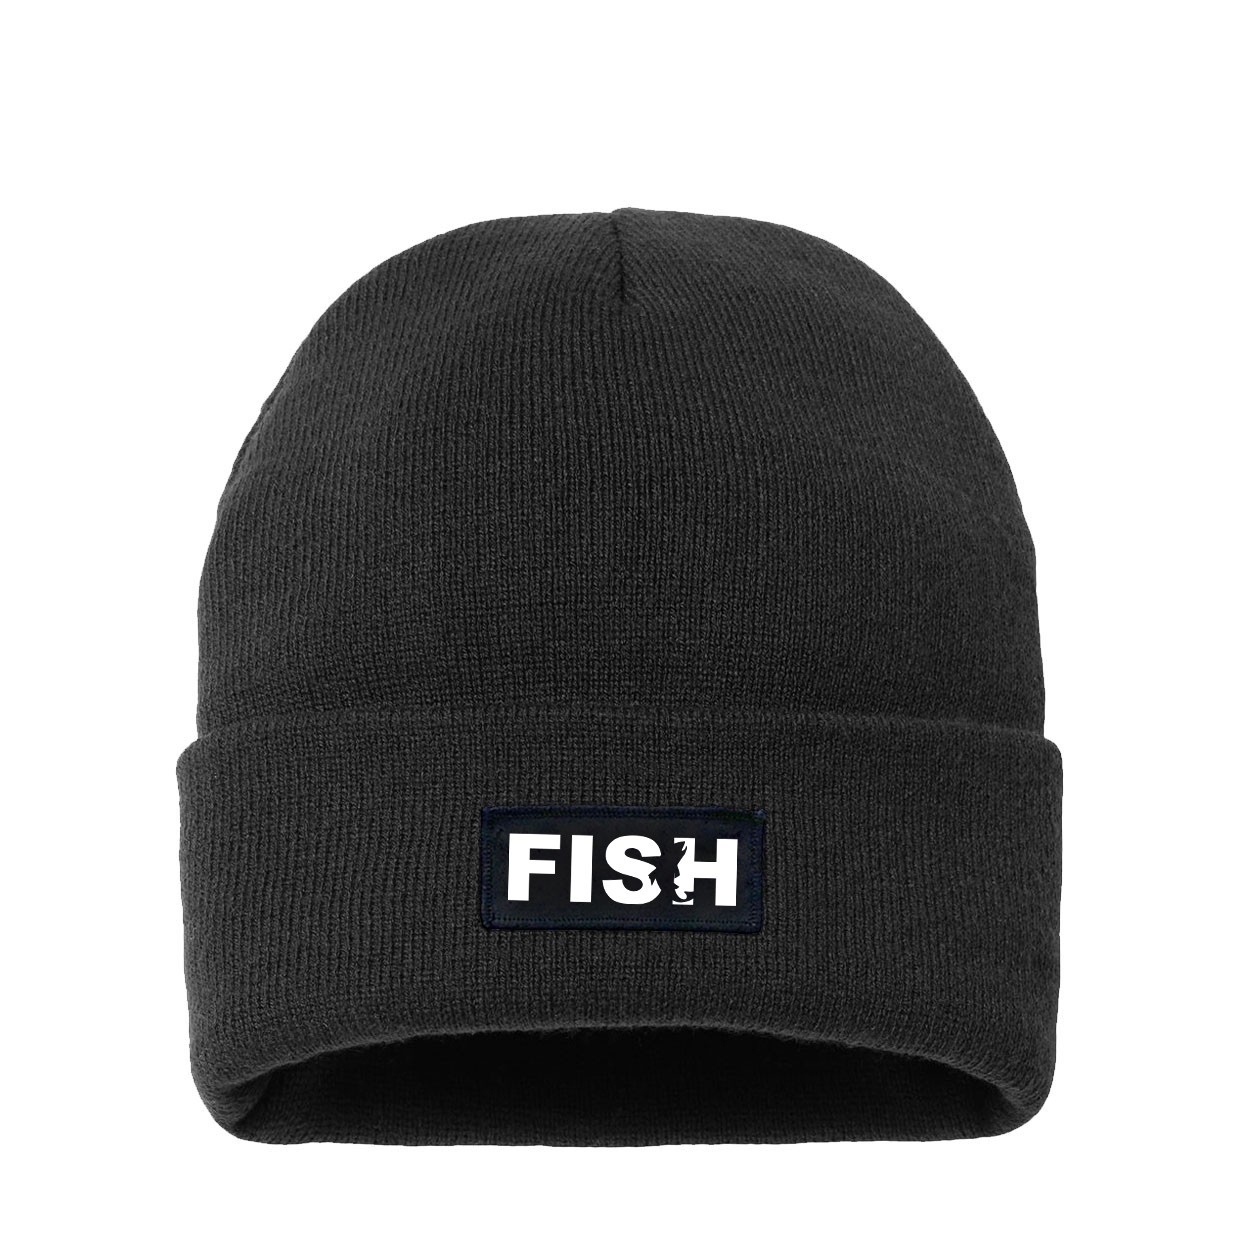 Fish Catch Logo Night Out Woven Patch Night Out Sherpa Lined Cuffed Beanie Black (White Logo)